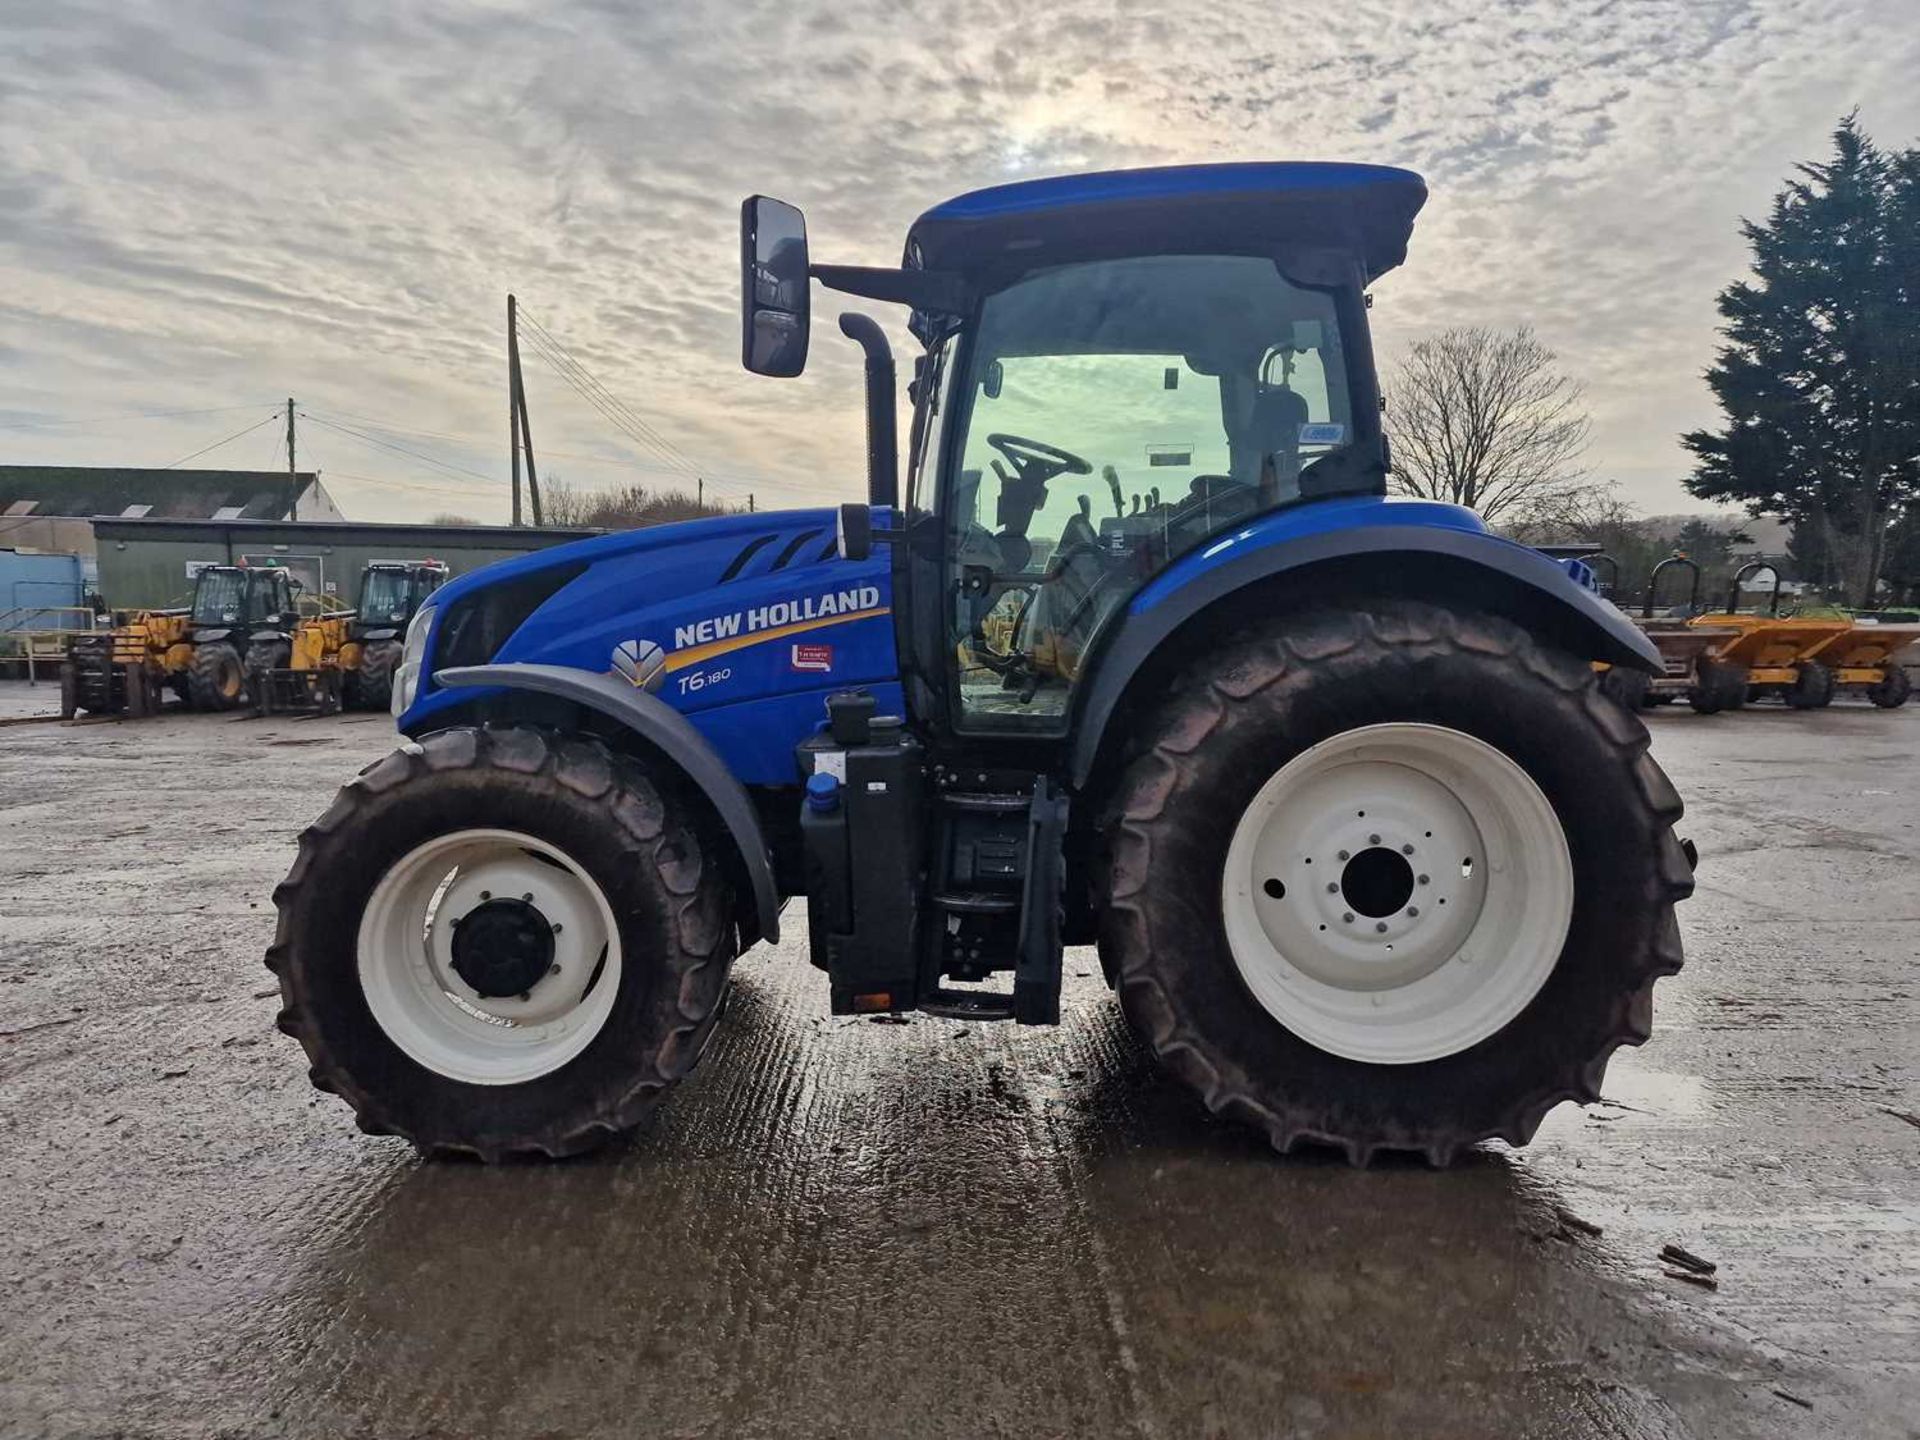 2019 New Holland T6.180 4WD Tractor, Cab Suspension, 3 Spool Valves, Push Out Hitch, A/C - Image 3 of 28